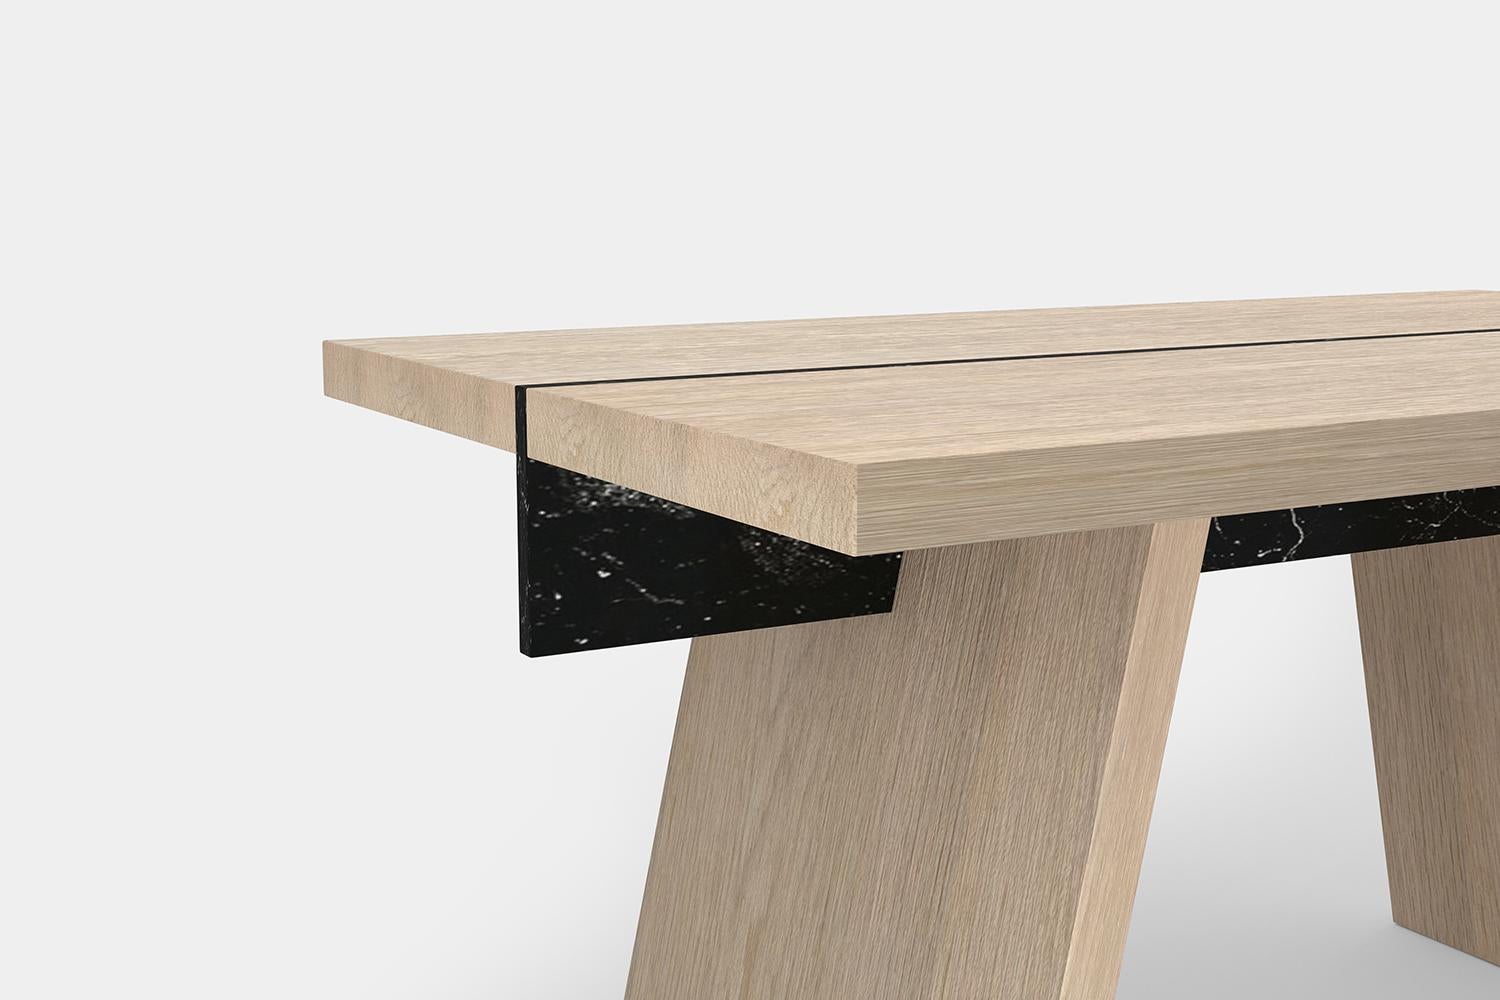 Contemporary Laws of Motion Desk in Solid Oak Wood, Home Office Writing Desk by Joel Escalona